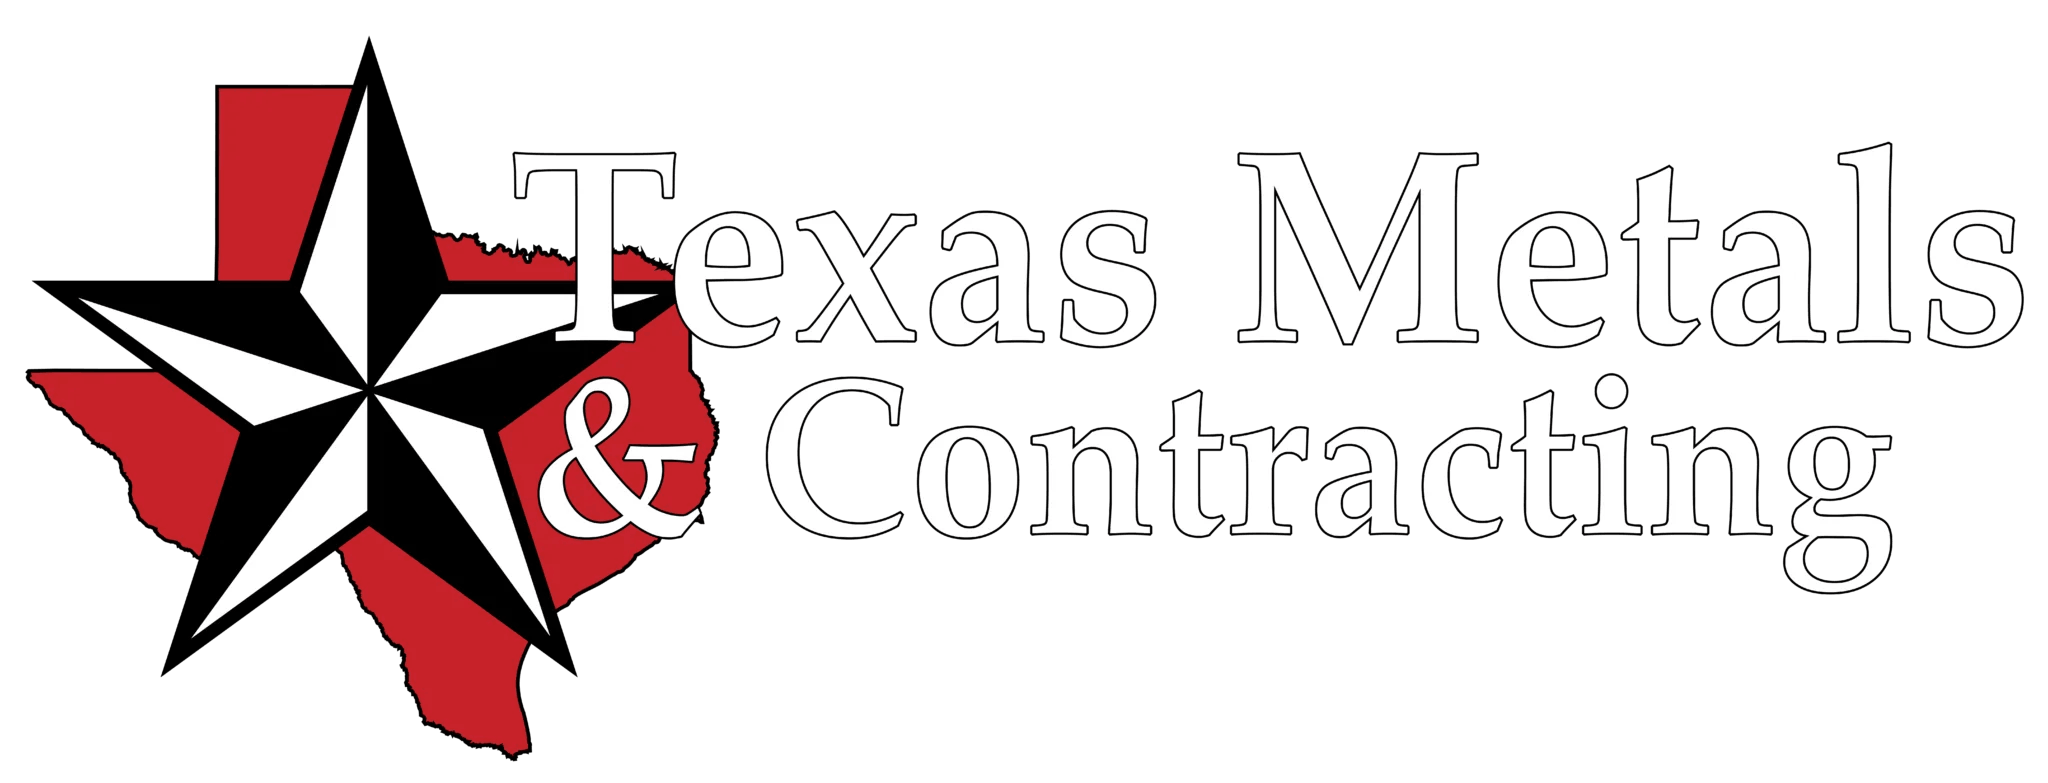 TEXAS-METALS-AND-CONTRACTING-LOGO